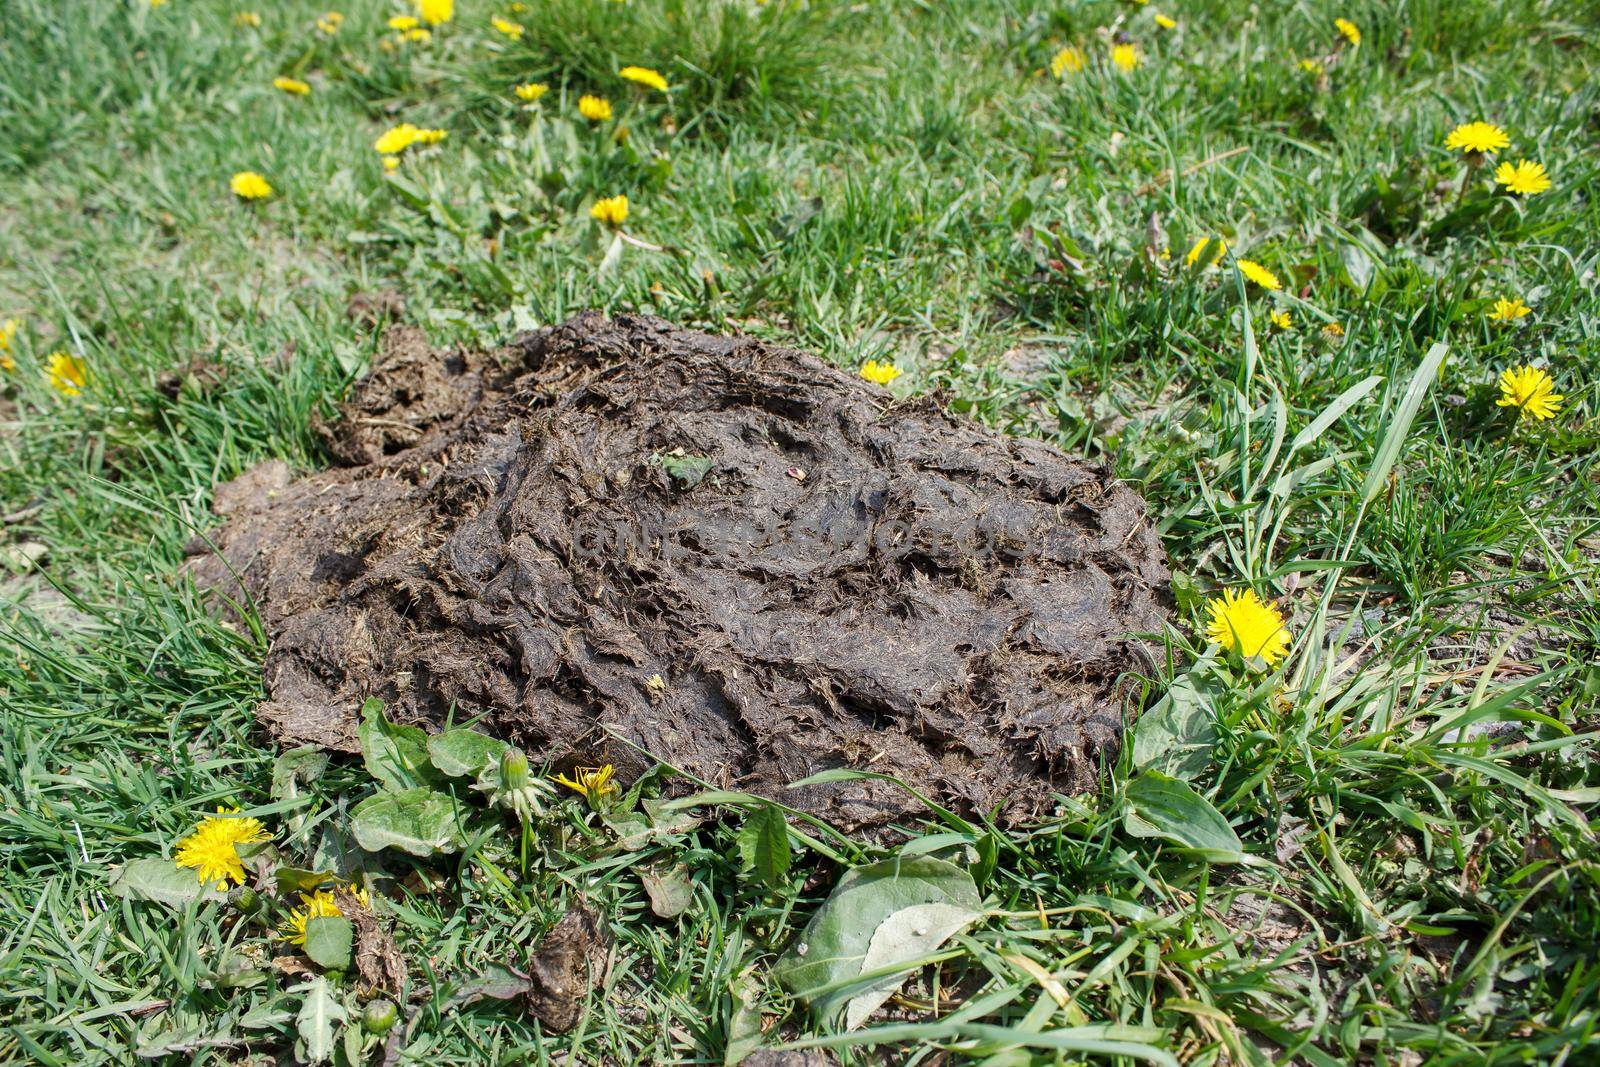 large pile of cow feces on gree grass by raddnatt